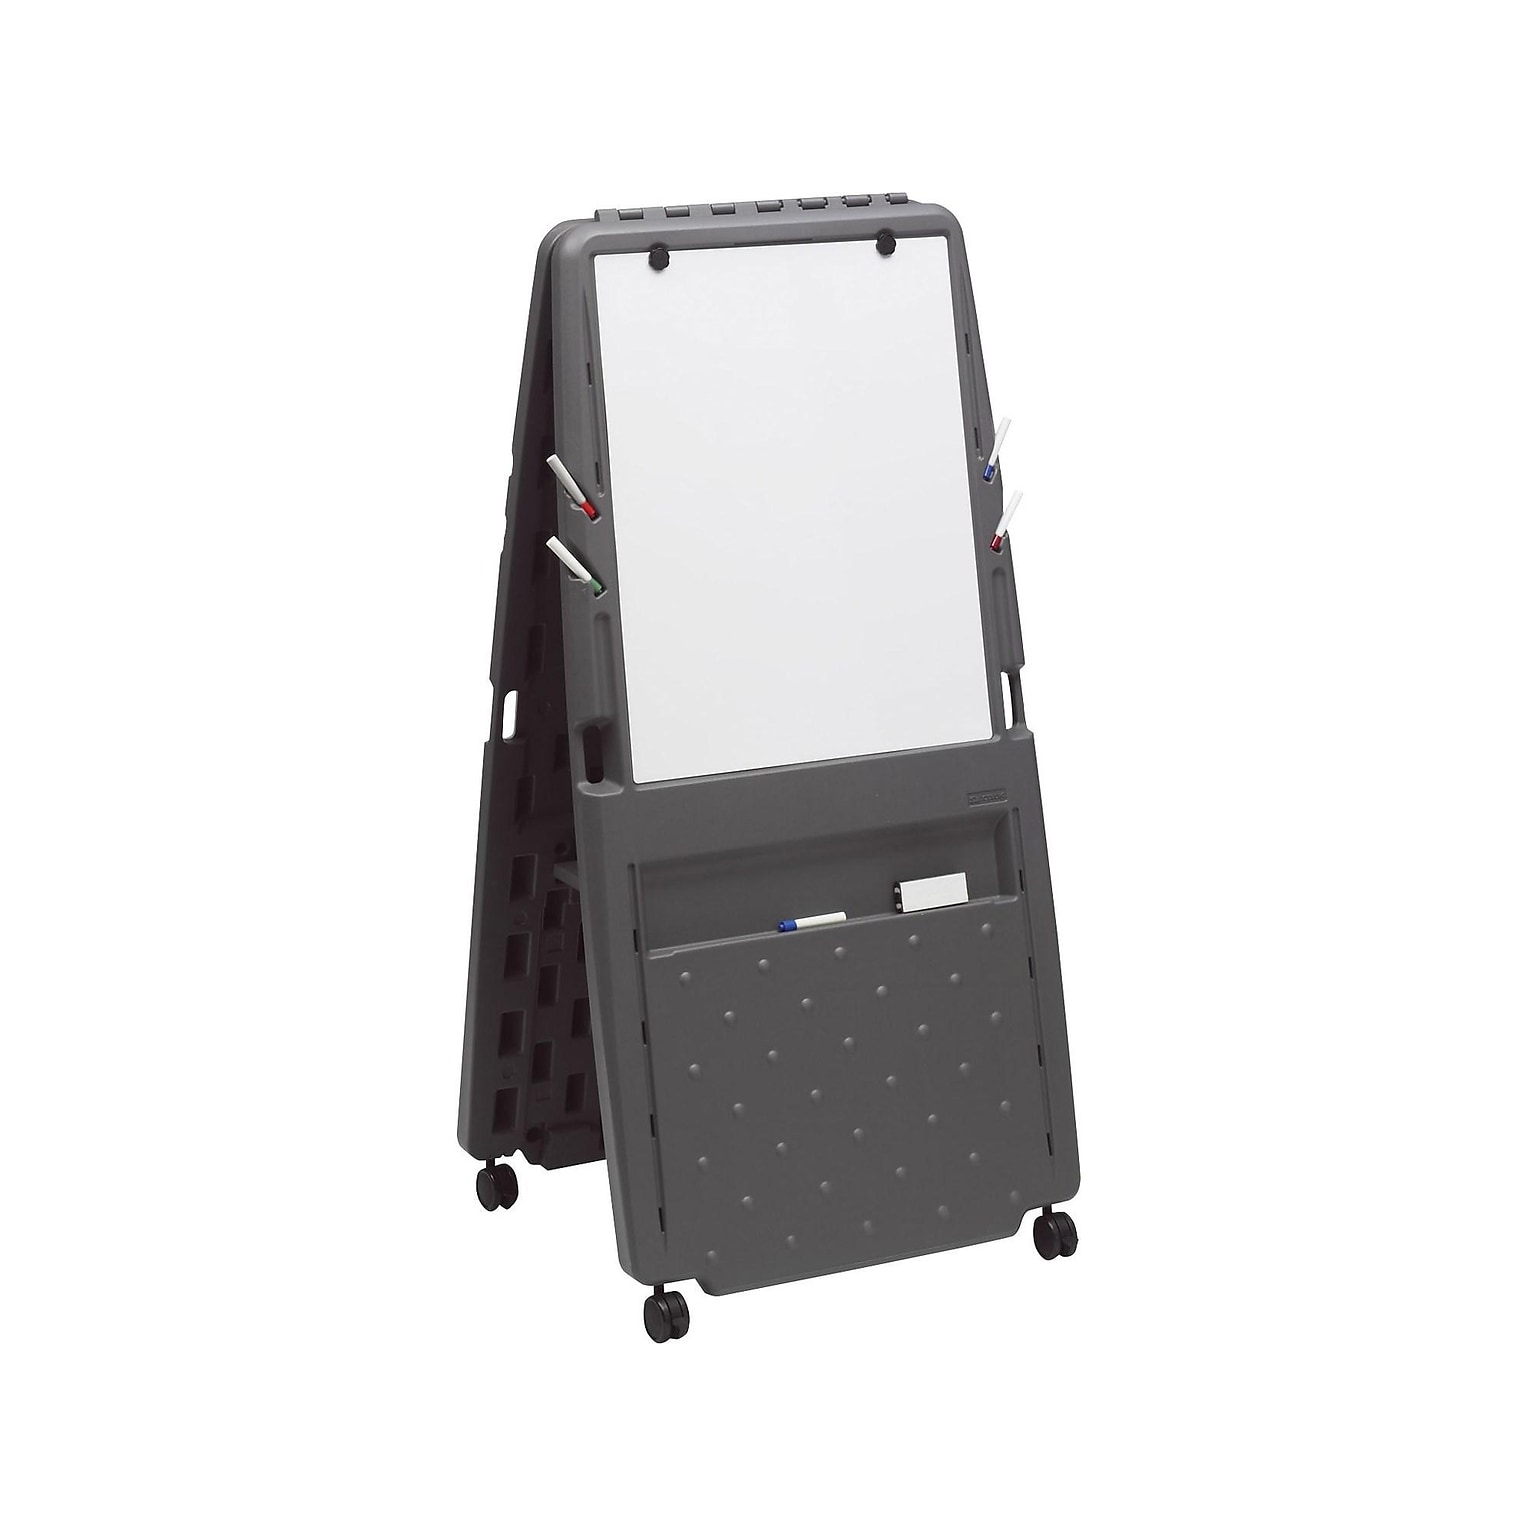 Iceberg Mobile Presentation Flip Chart Easel with Dry-Erase Surface, Charcoal, 73 x 33 x 28 (30237)